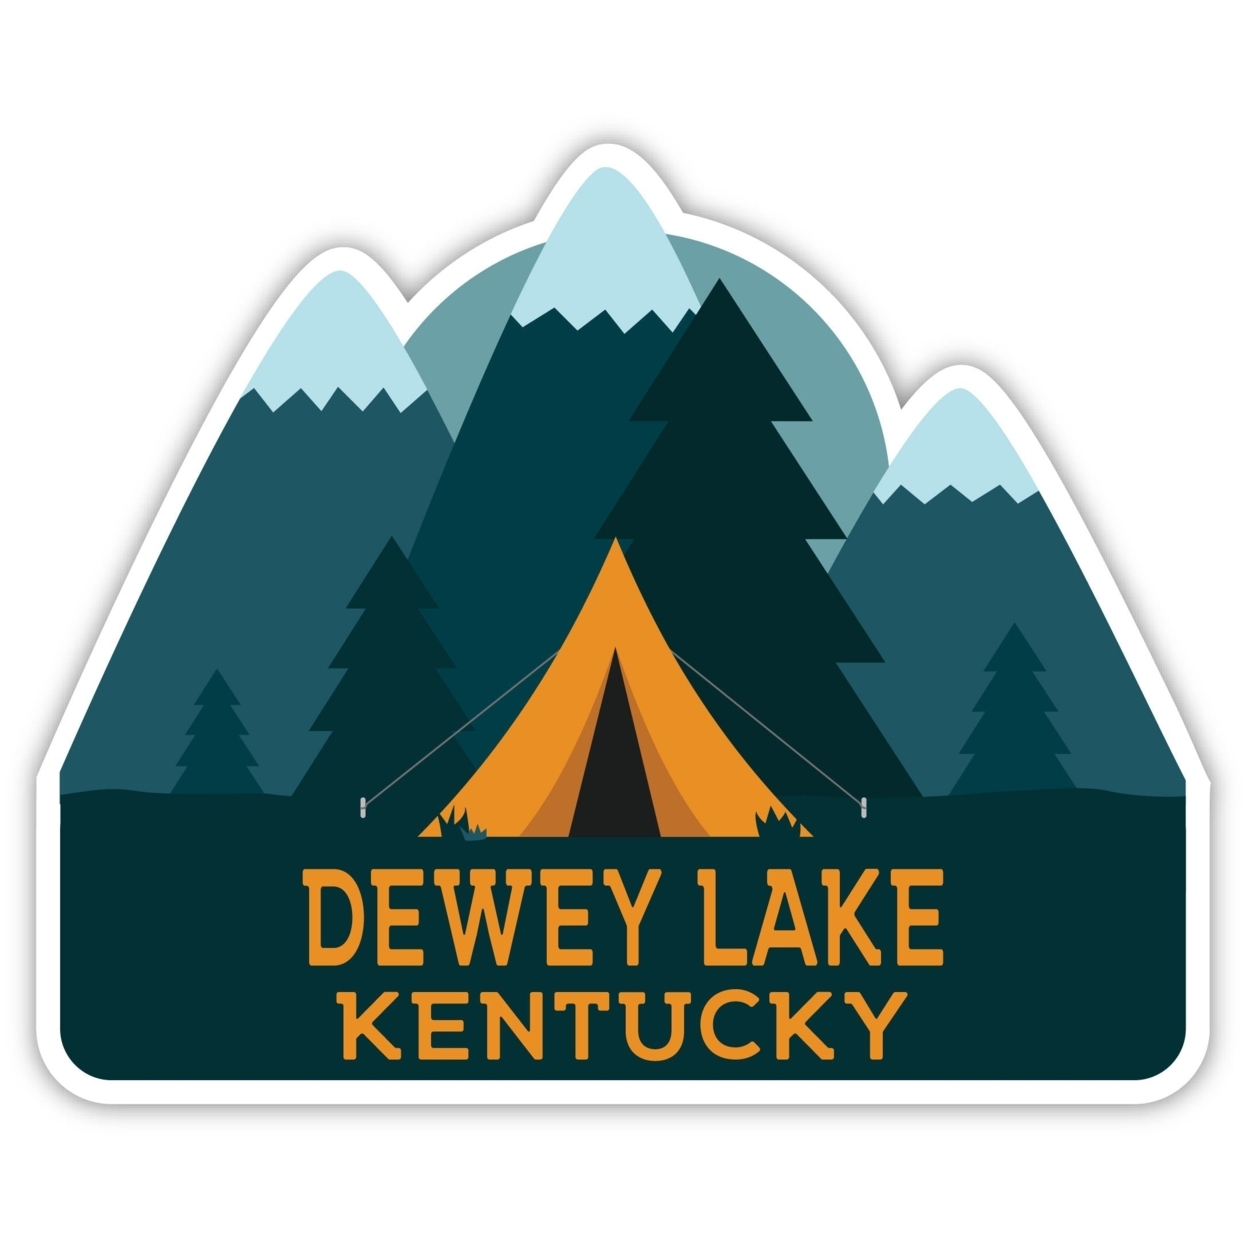 Dewey Lake Kentucky Souvenir Decorative Stickers (Choose Theme And Size) - 4-Pack, 12-Inch, Tent